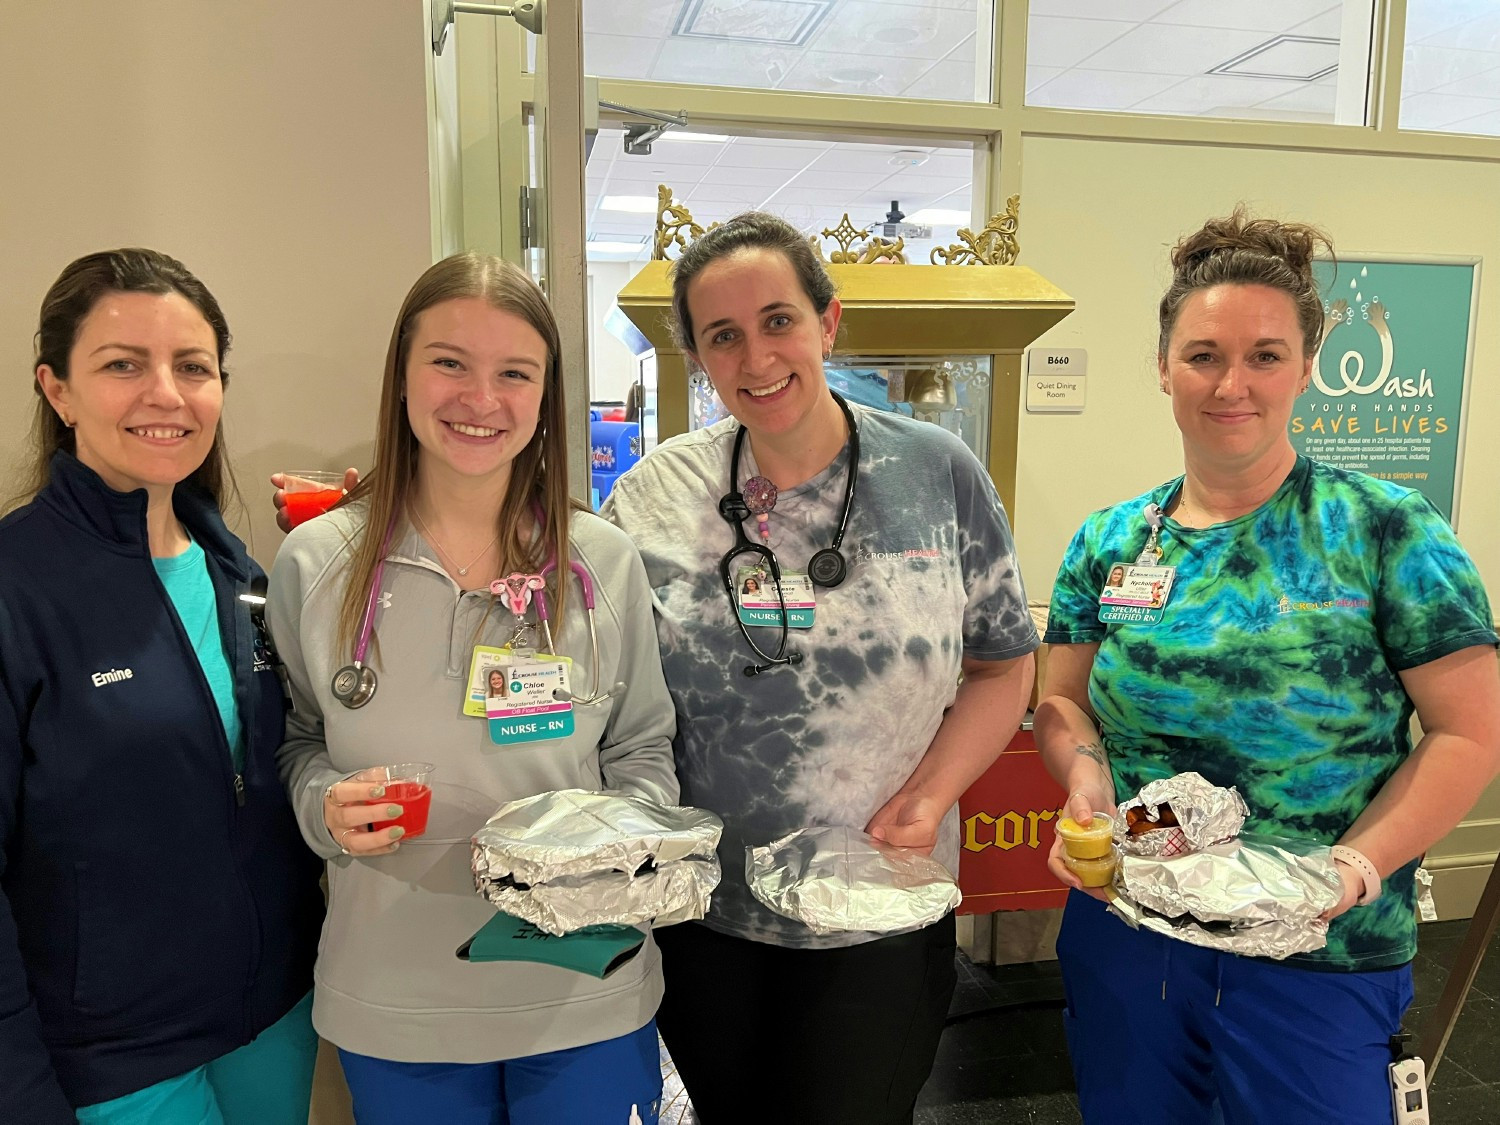 Nurses from our Kienzle Family Maternity Center enjoy fun, food and festivities at our Spring Carnival.